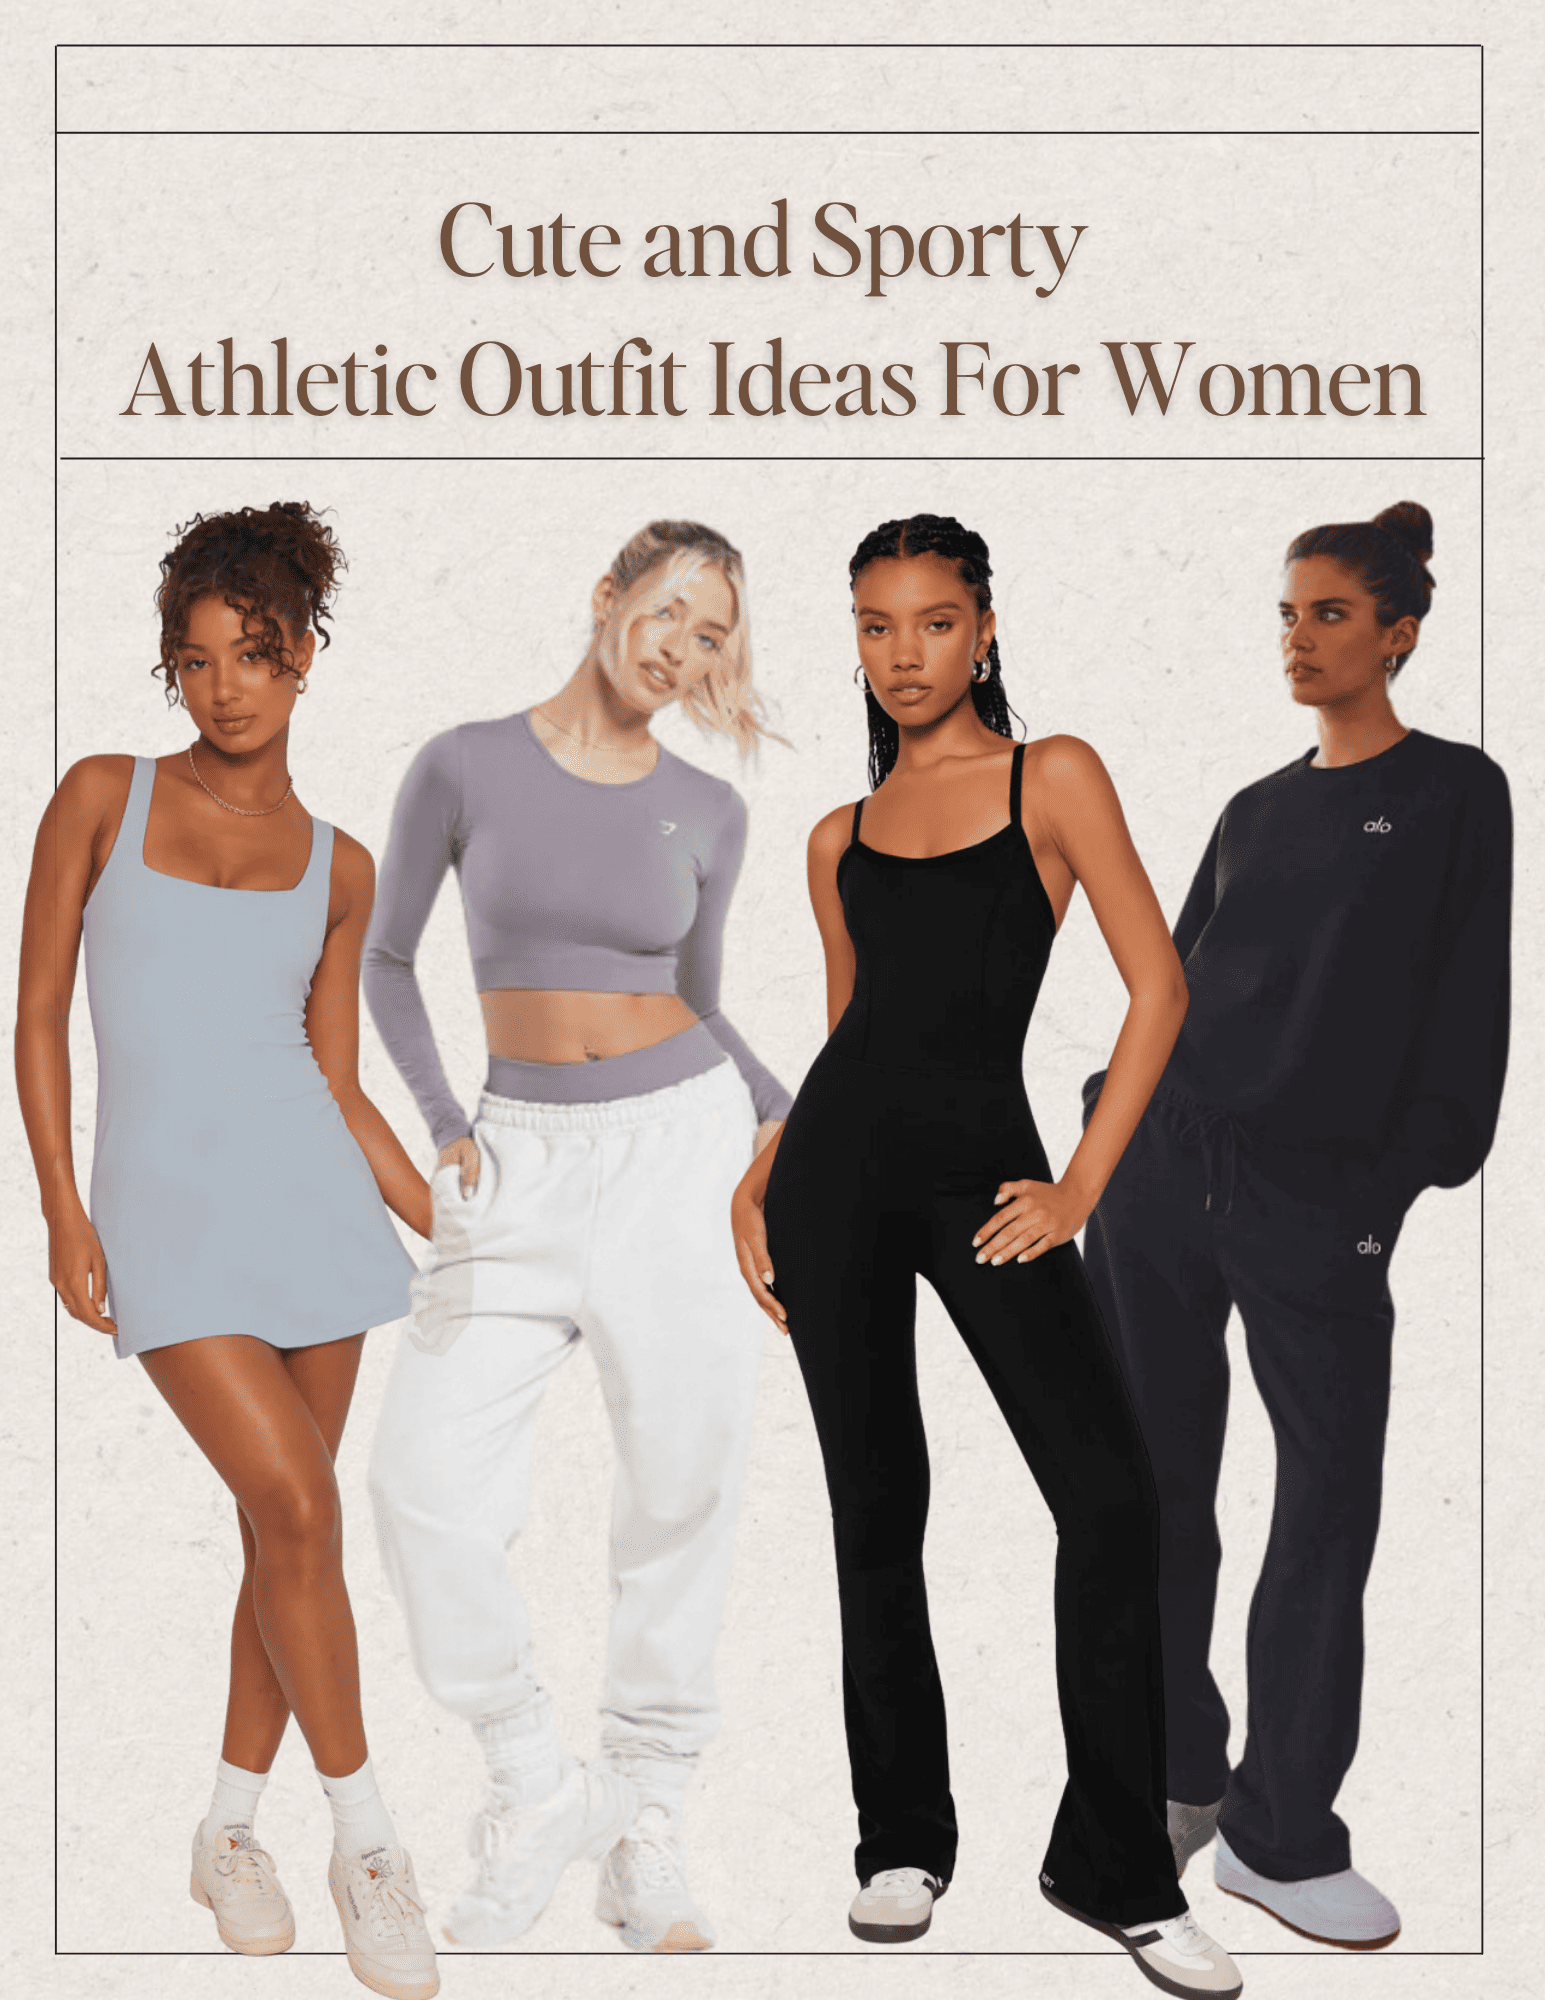 10 Cute and Sporty Athletic Outfit Ideas For Women - Purfect Sunday